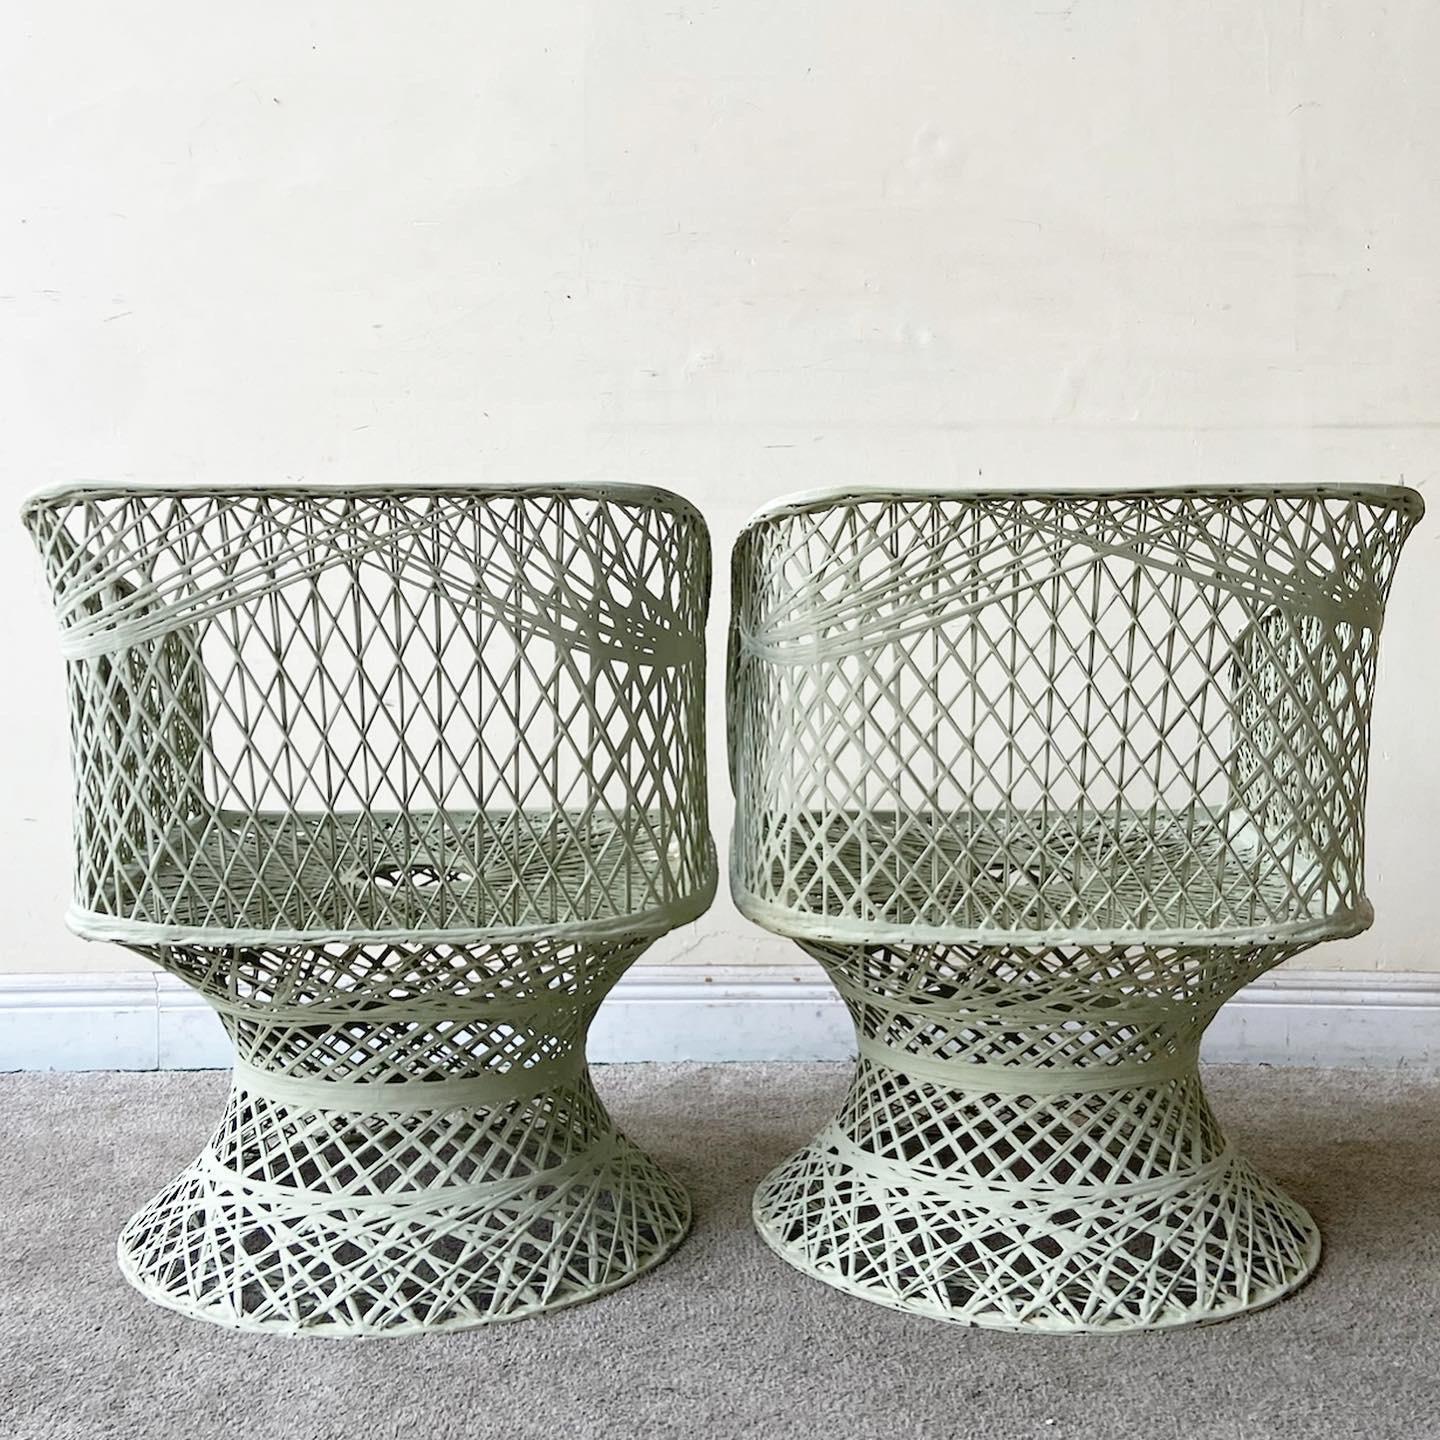 Incredible pair of Mid-Century Modern spun fiberglass arm chairs. Each feature a fantastic woven design with a painted green finish.